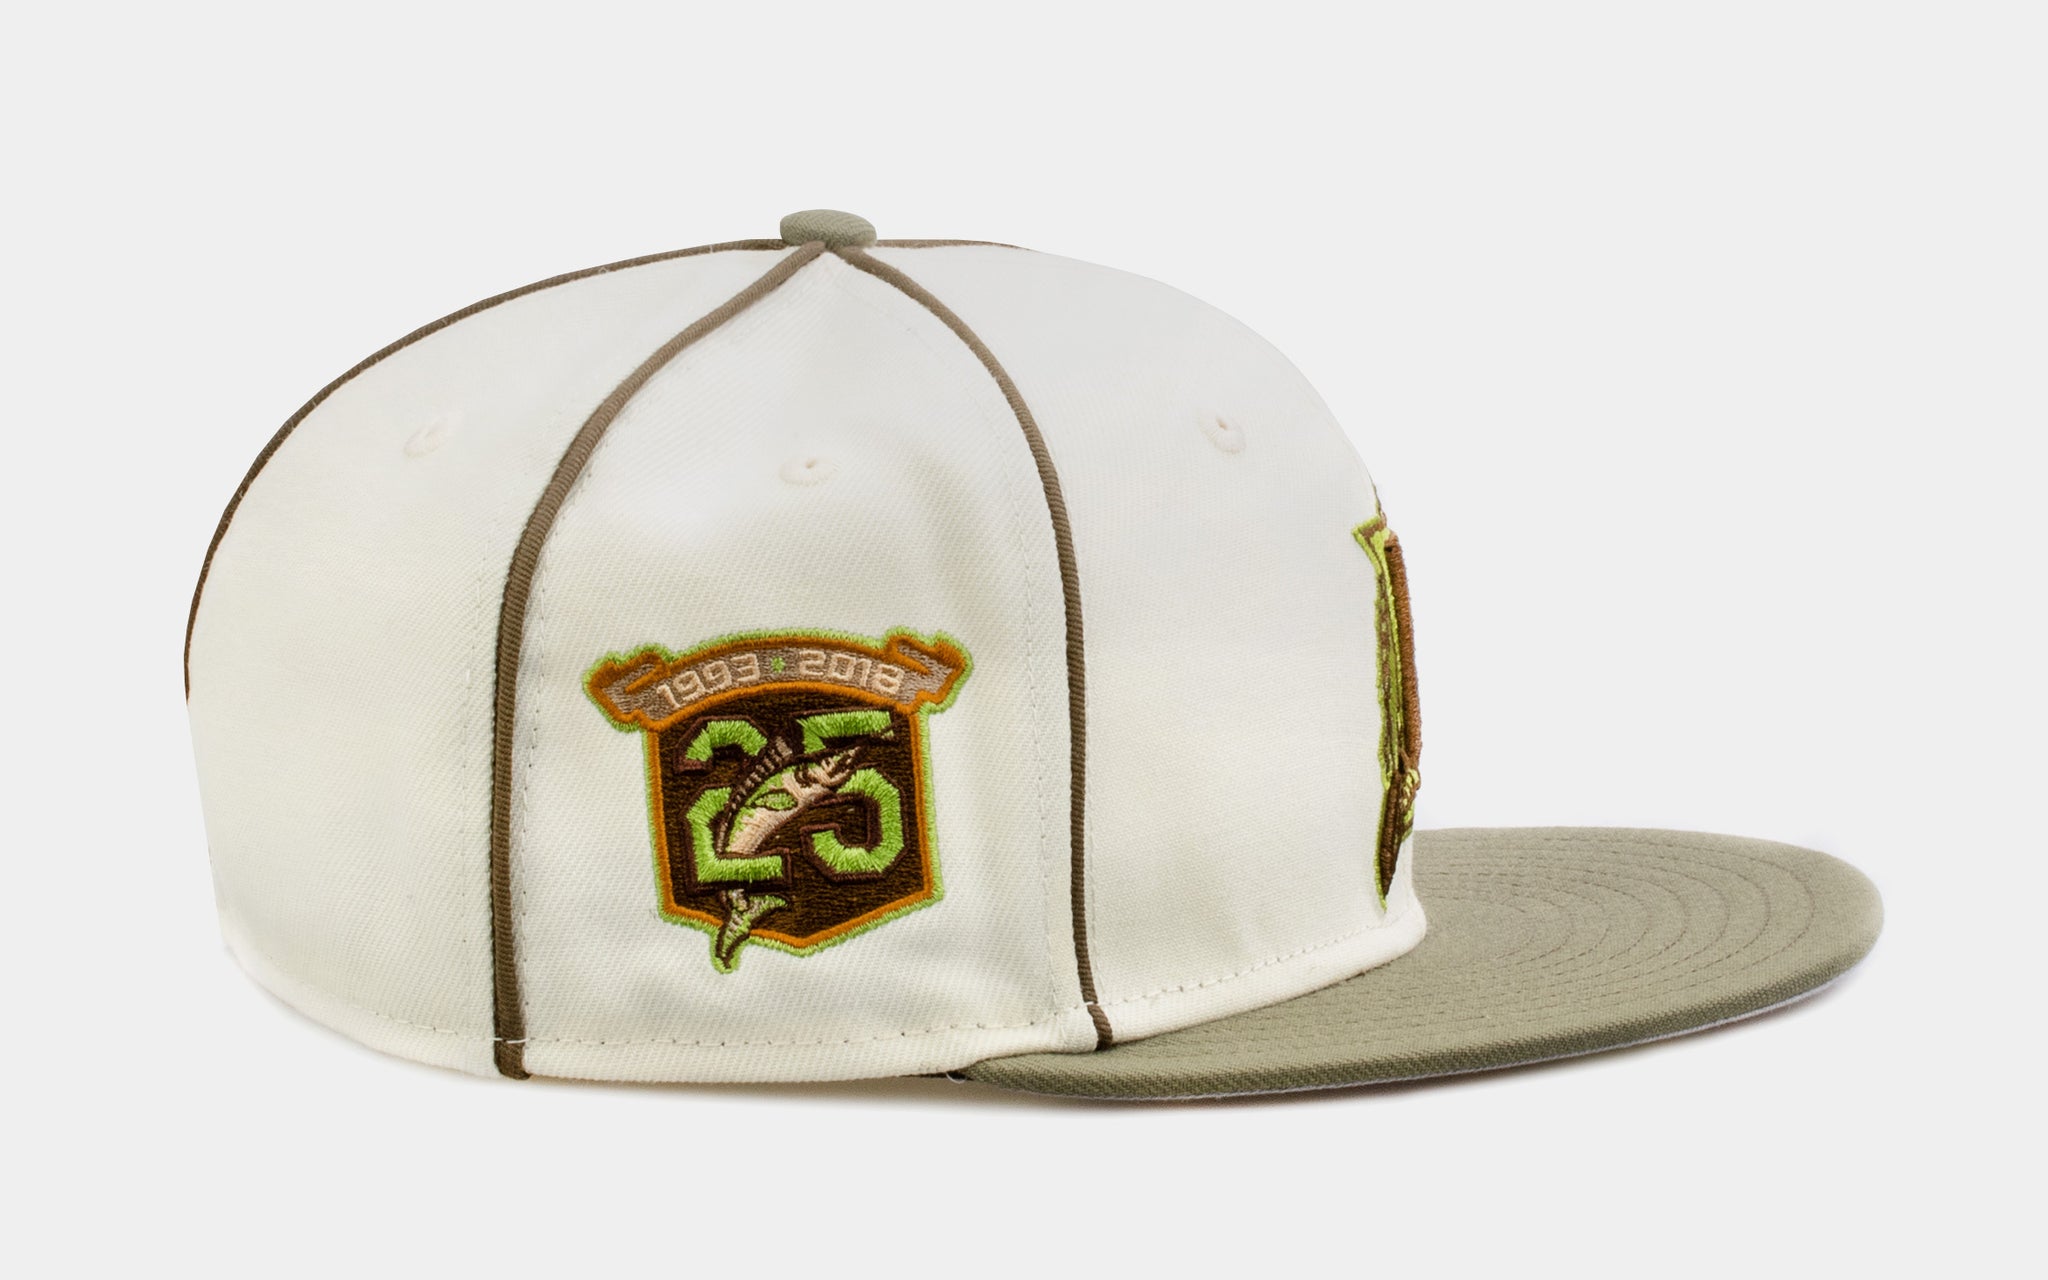 New Era Shoe Palace Exclusive Autumn Wheat Arizona Cardinals 59FIFTY Mens Fitted Hat (Beige/Green)